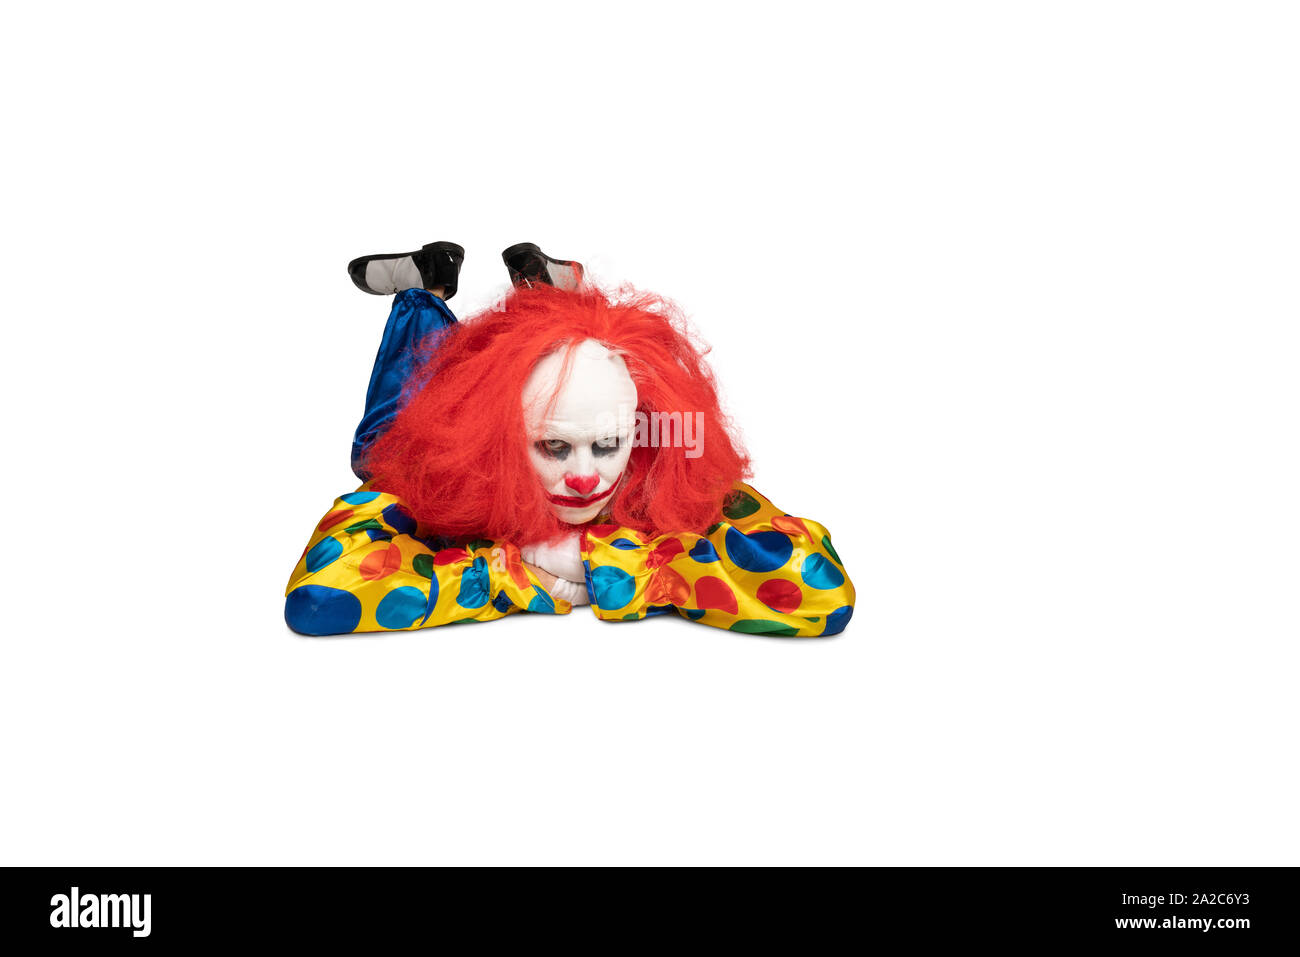 bored clown lies on the floor and looks at the camera Stock Photo